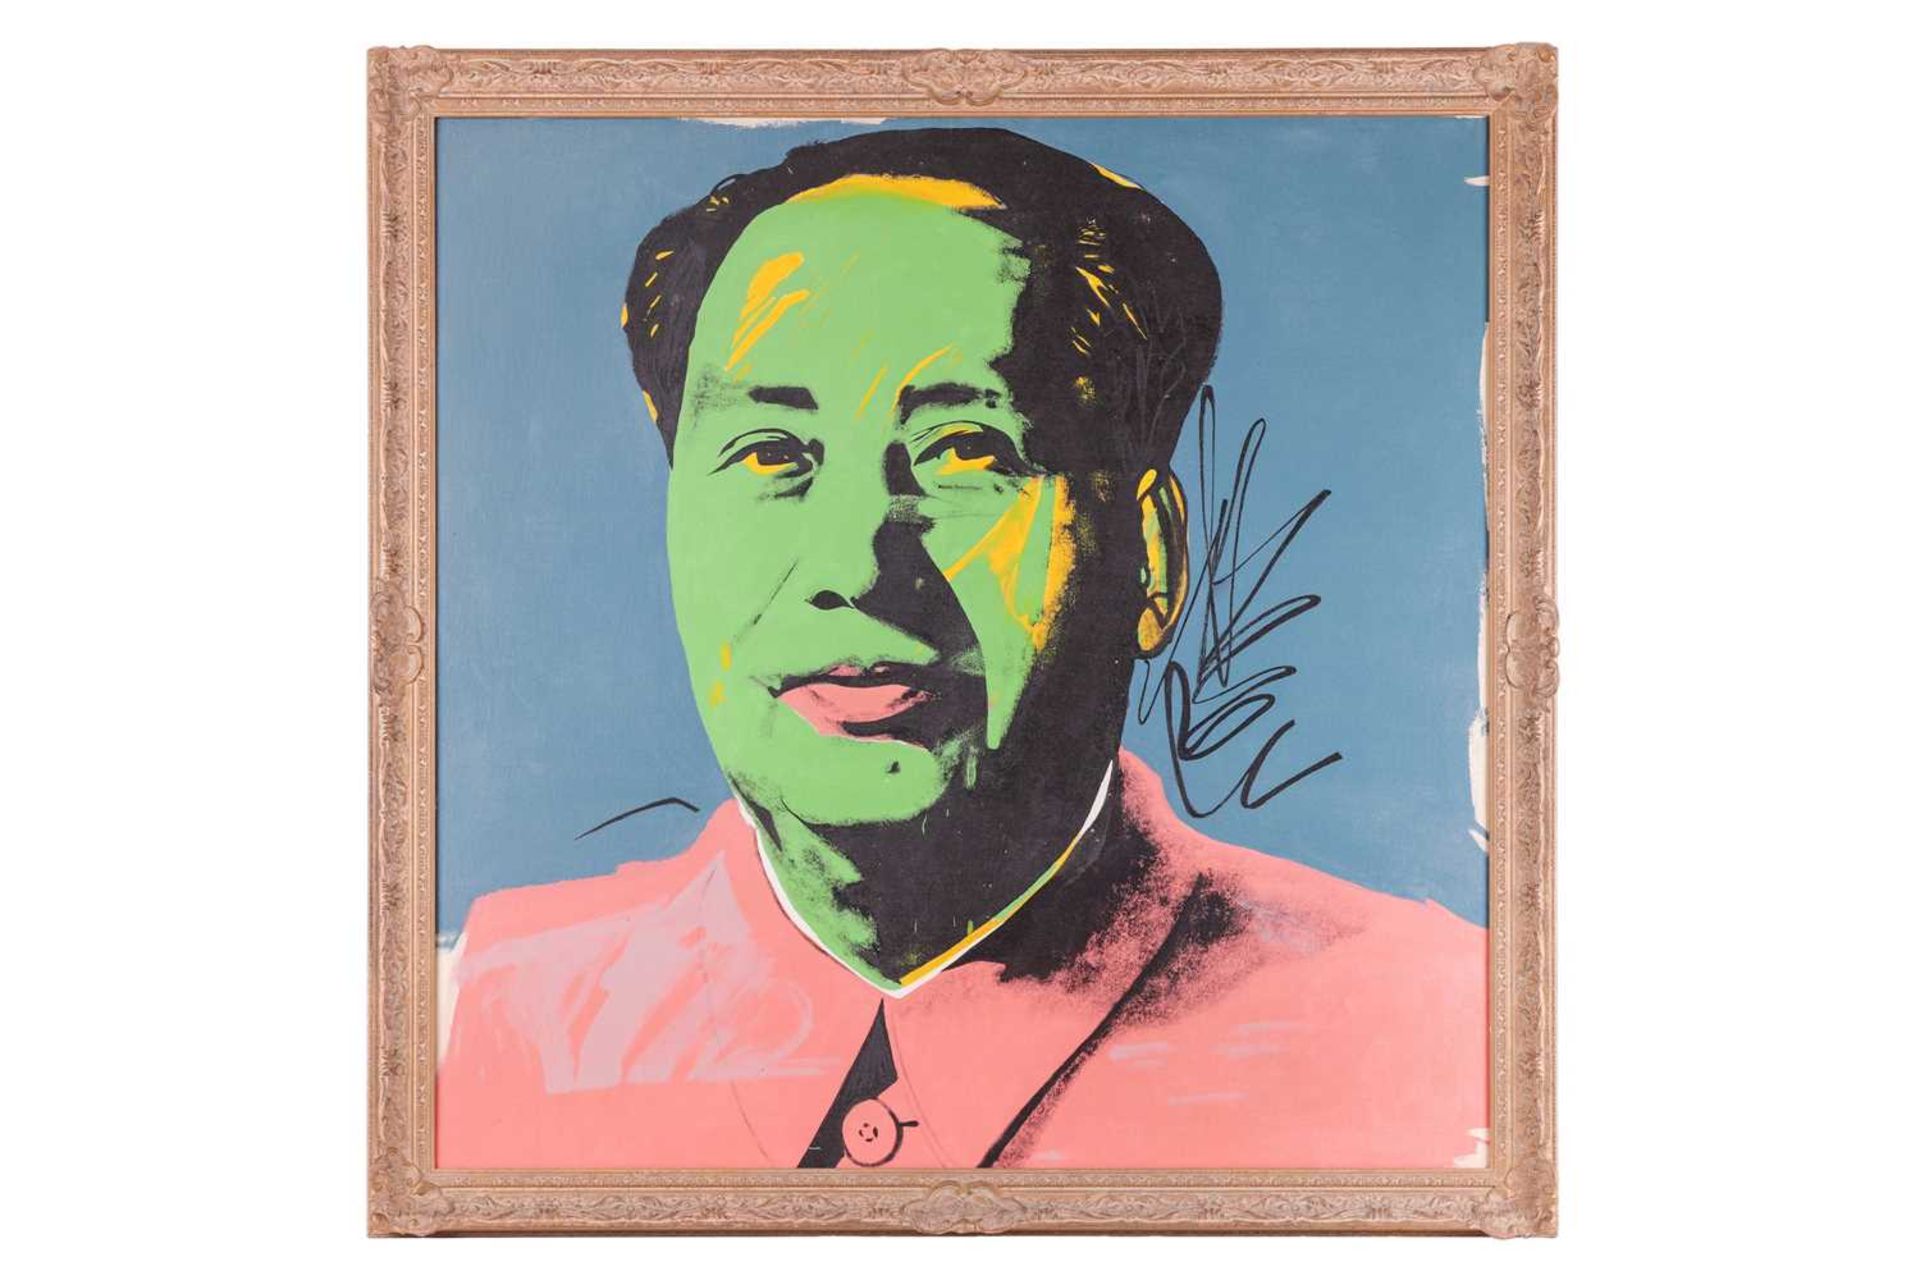 After Andy Warhol (American, 1928 - 1987), Mao 1972 (Green), unsigned, oil on canvas, 100 x 100 cm, 